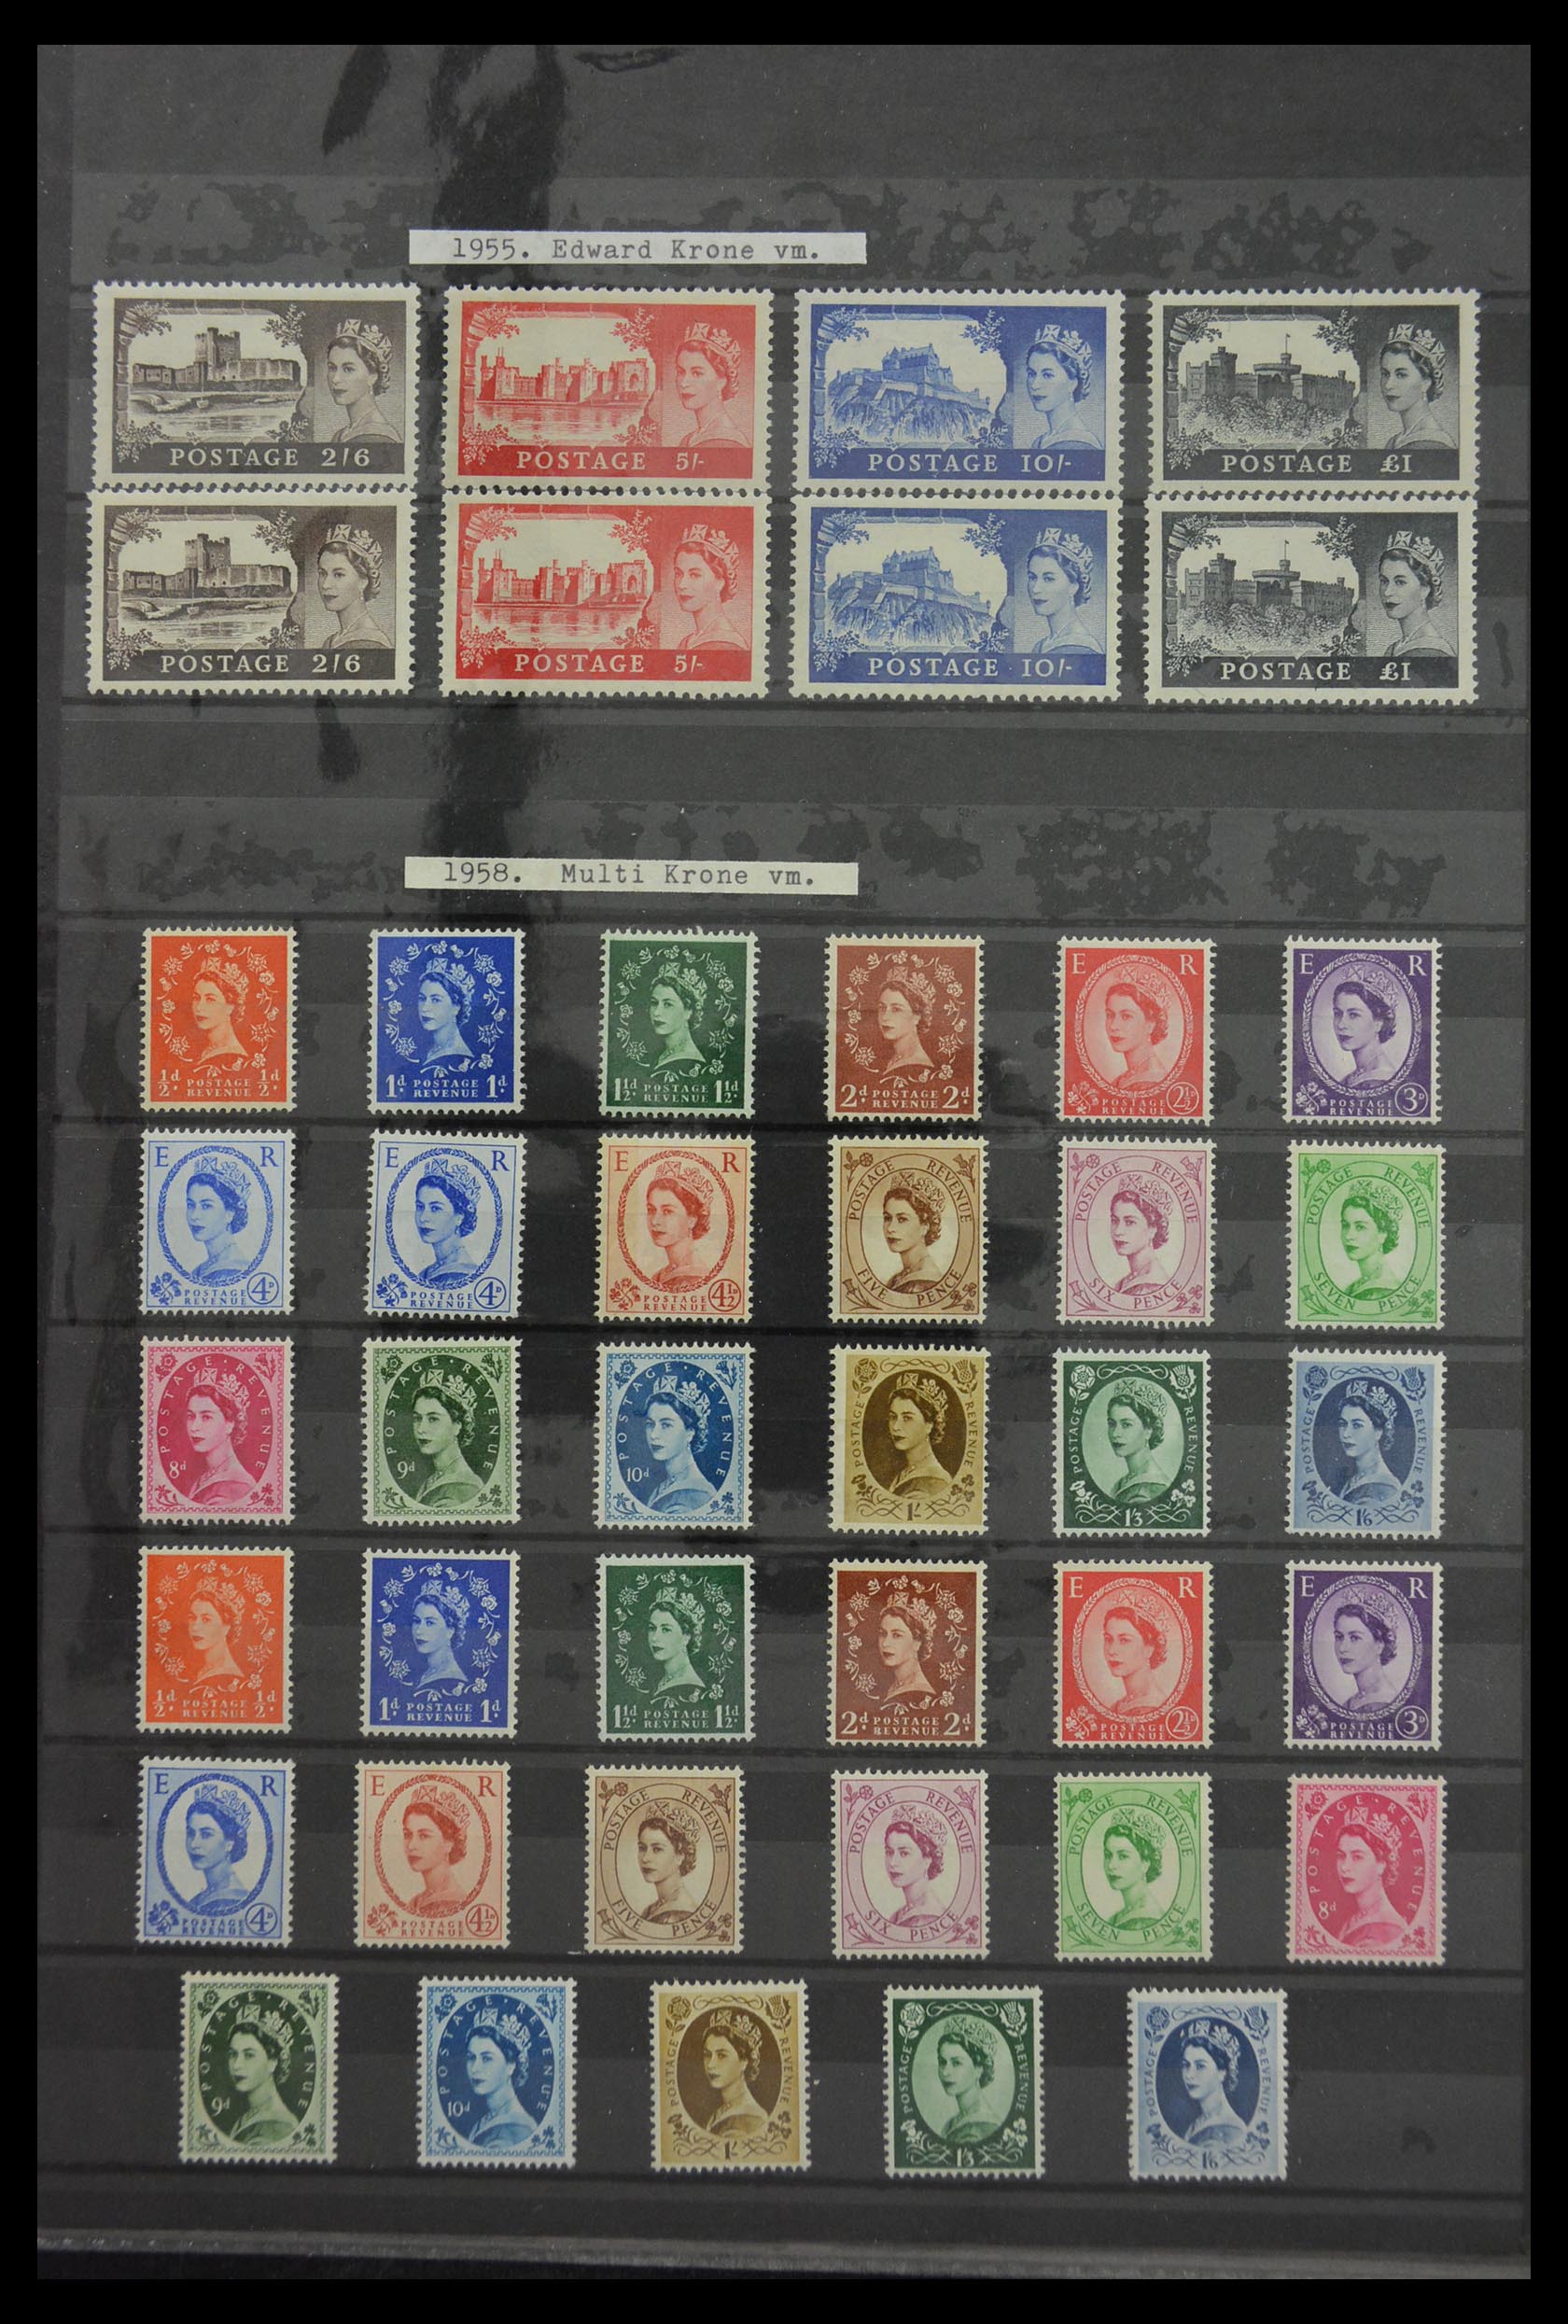 29940 439 - 29940 Great Britain and Colonies 1920-1970.